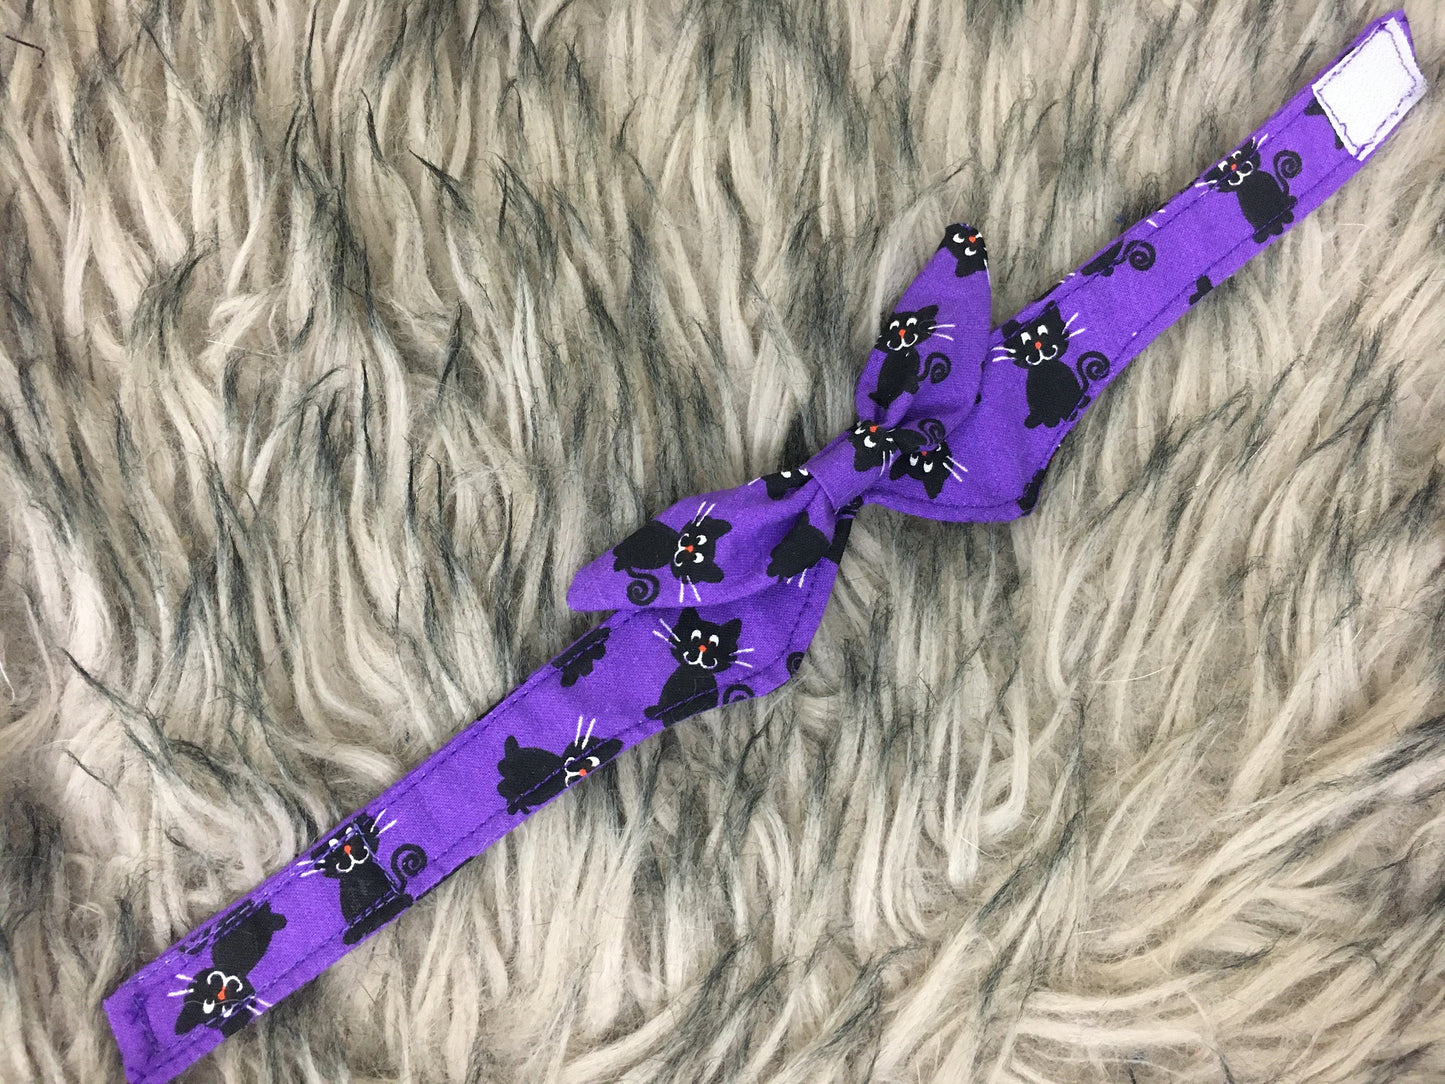 Purple Cat Bowtie with Cats